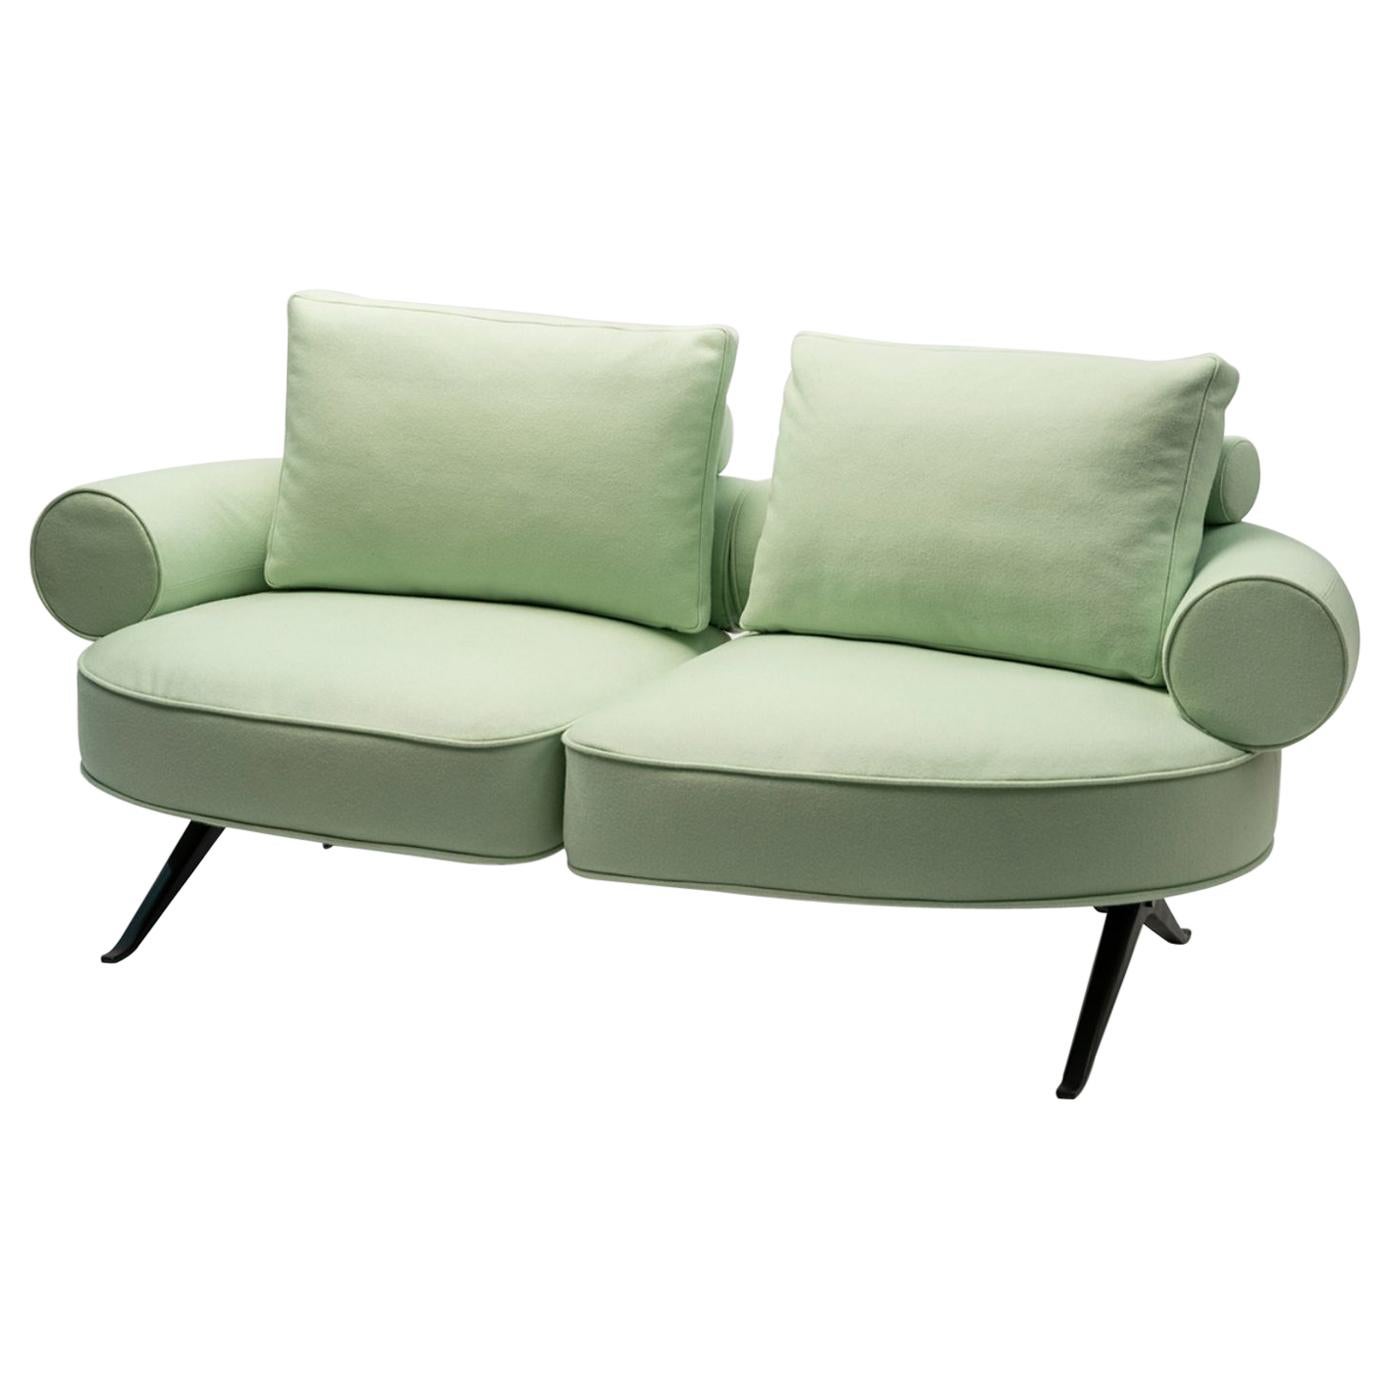 Luizet Modular Sofa by Luca Nichetto For Sale at 1stDibs